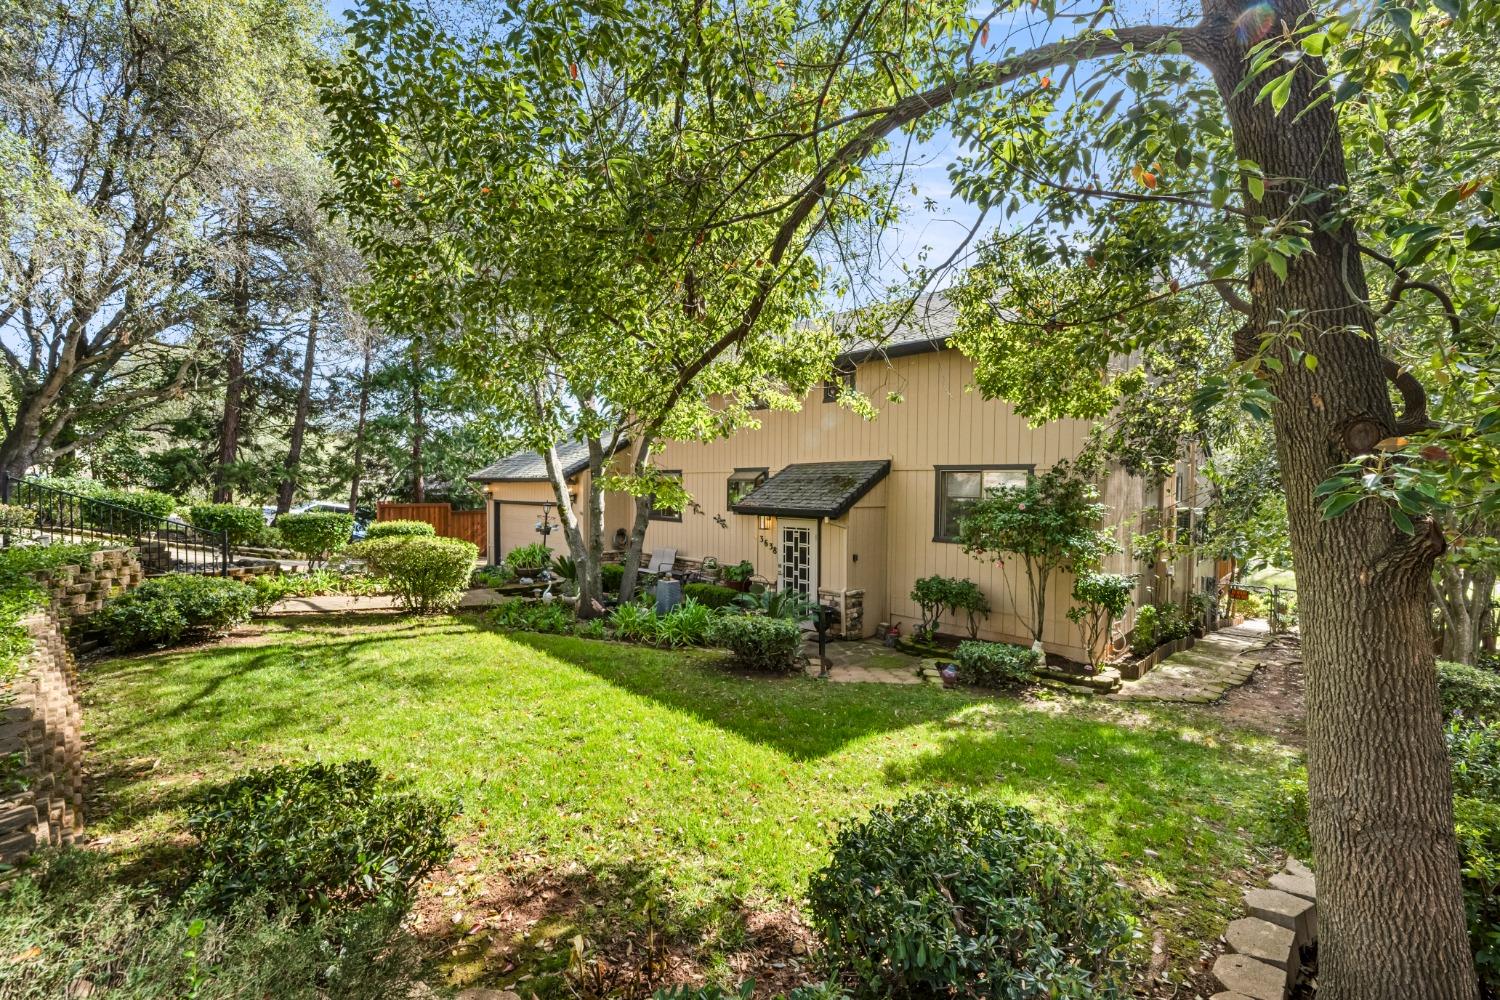 Photo of 3638 Millbrae Rd in Cameron Park, CA